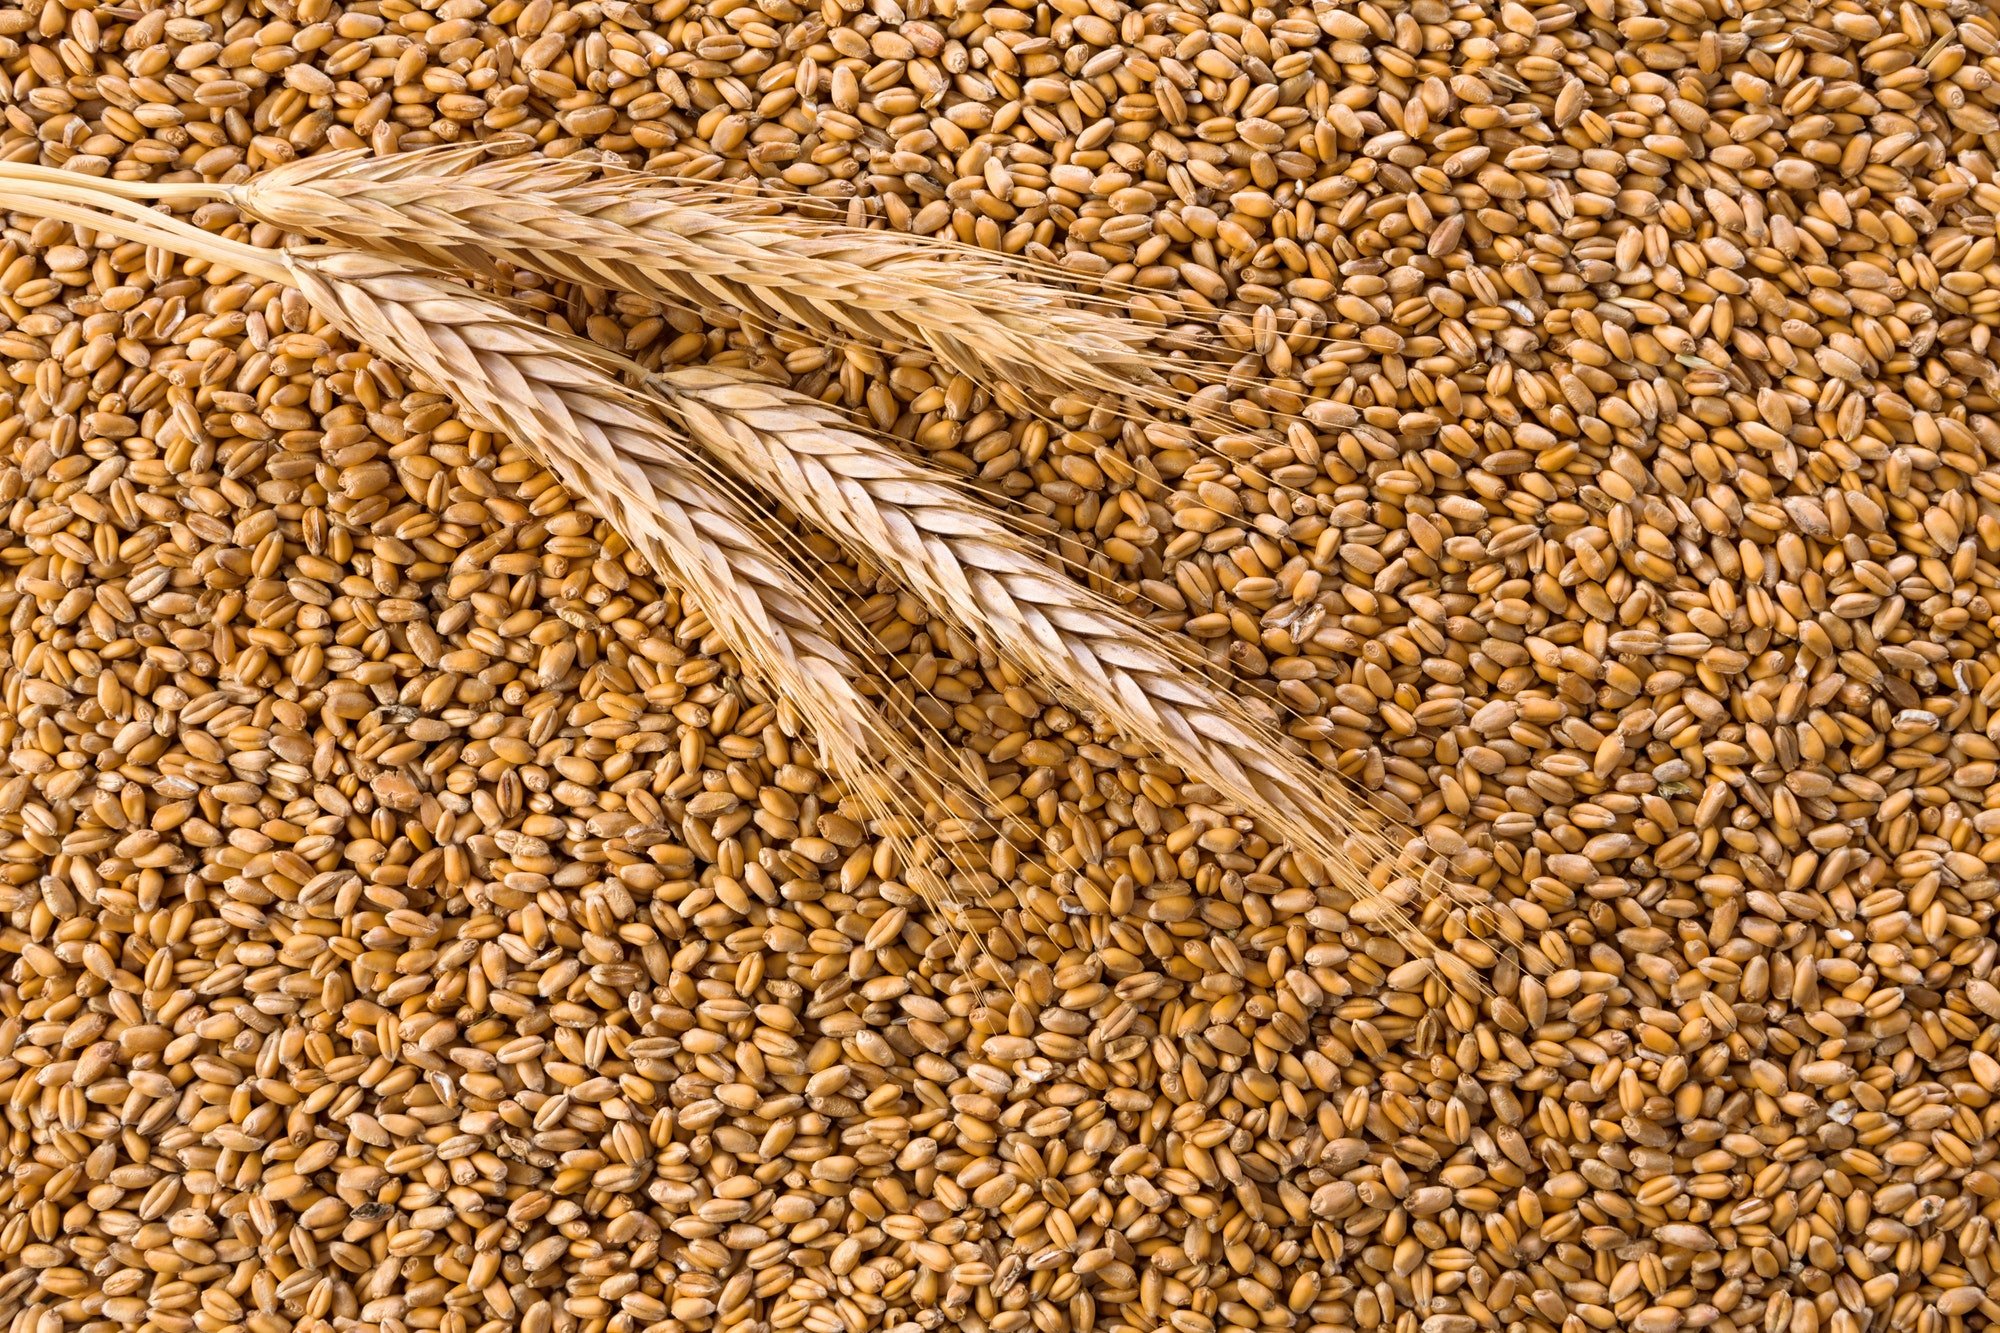 The Russian Foreign Ministry announced the completion of negotiations on the processing of 1 million tons of grain in Turkey